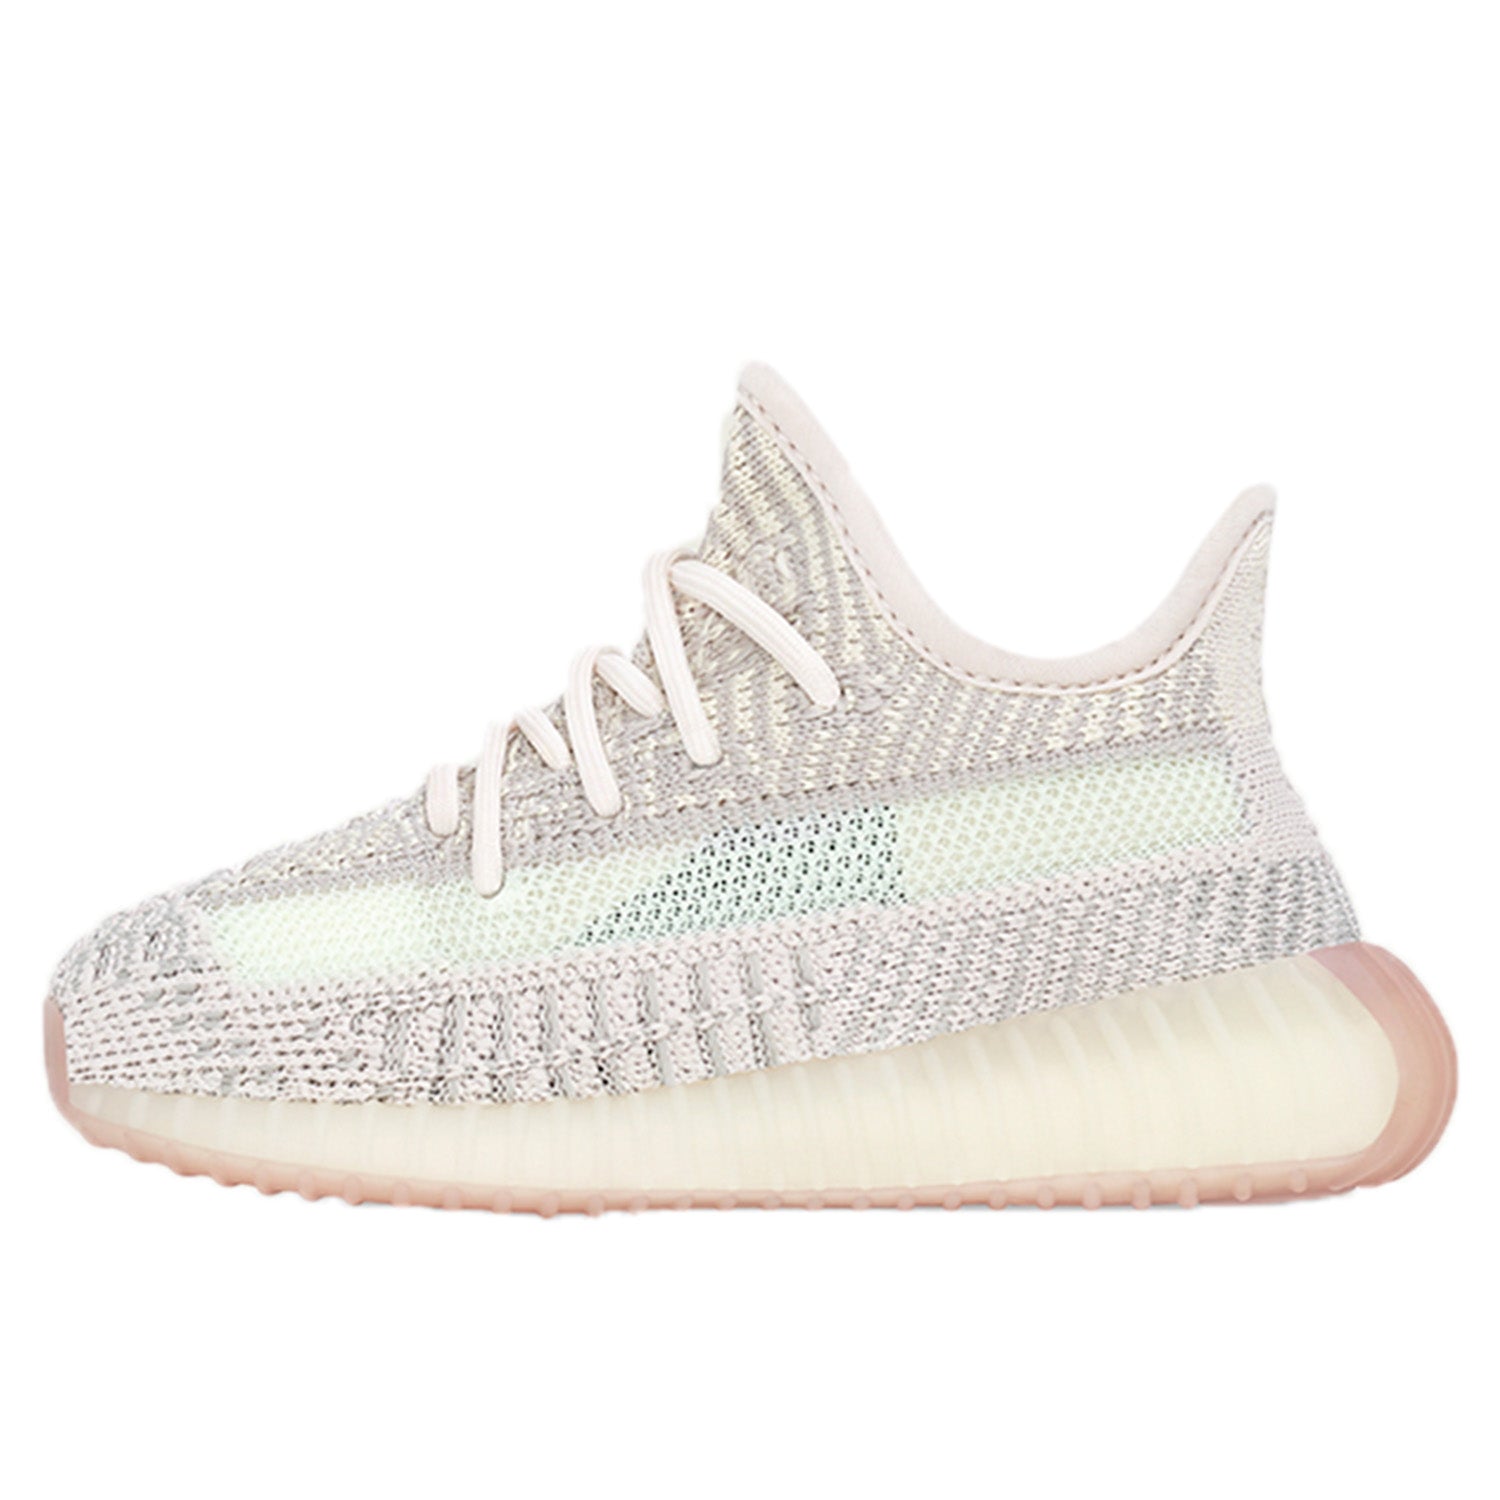 Adidas Yeezy Boost 350 V2 Toddlers Style : Fw3047